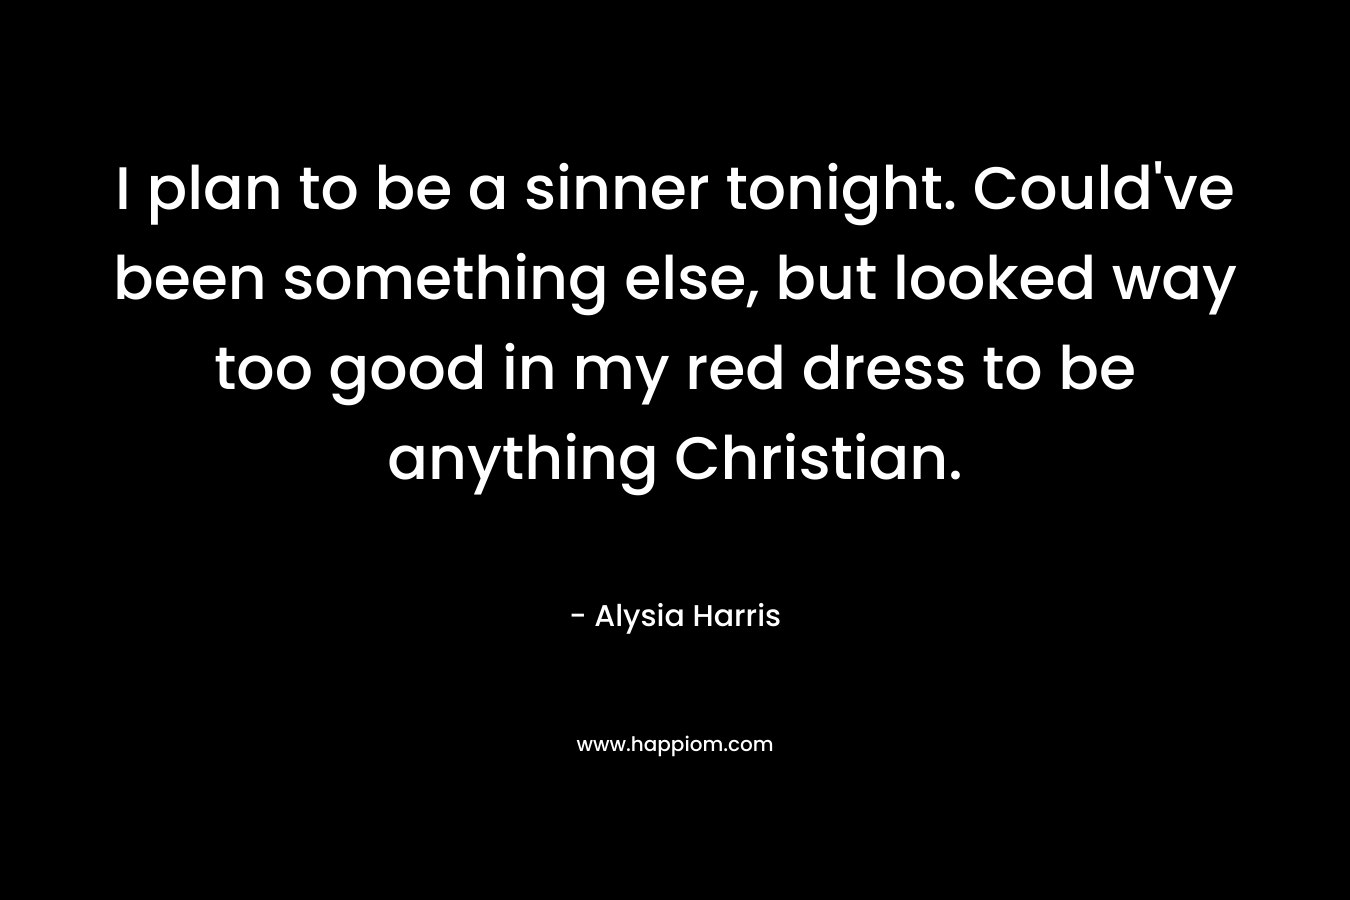 I plan to be a sinner tonight. Could’ve been something else, but looked way too good in my red dress to be anything Christian. – Alysia Harris